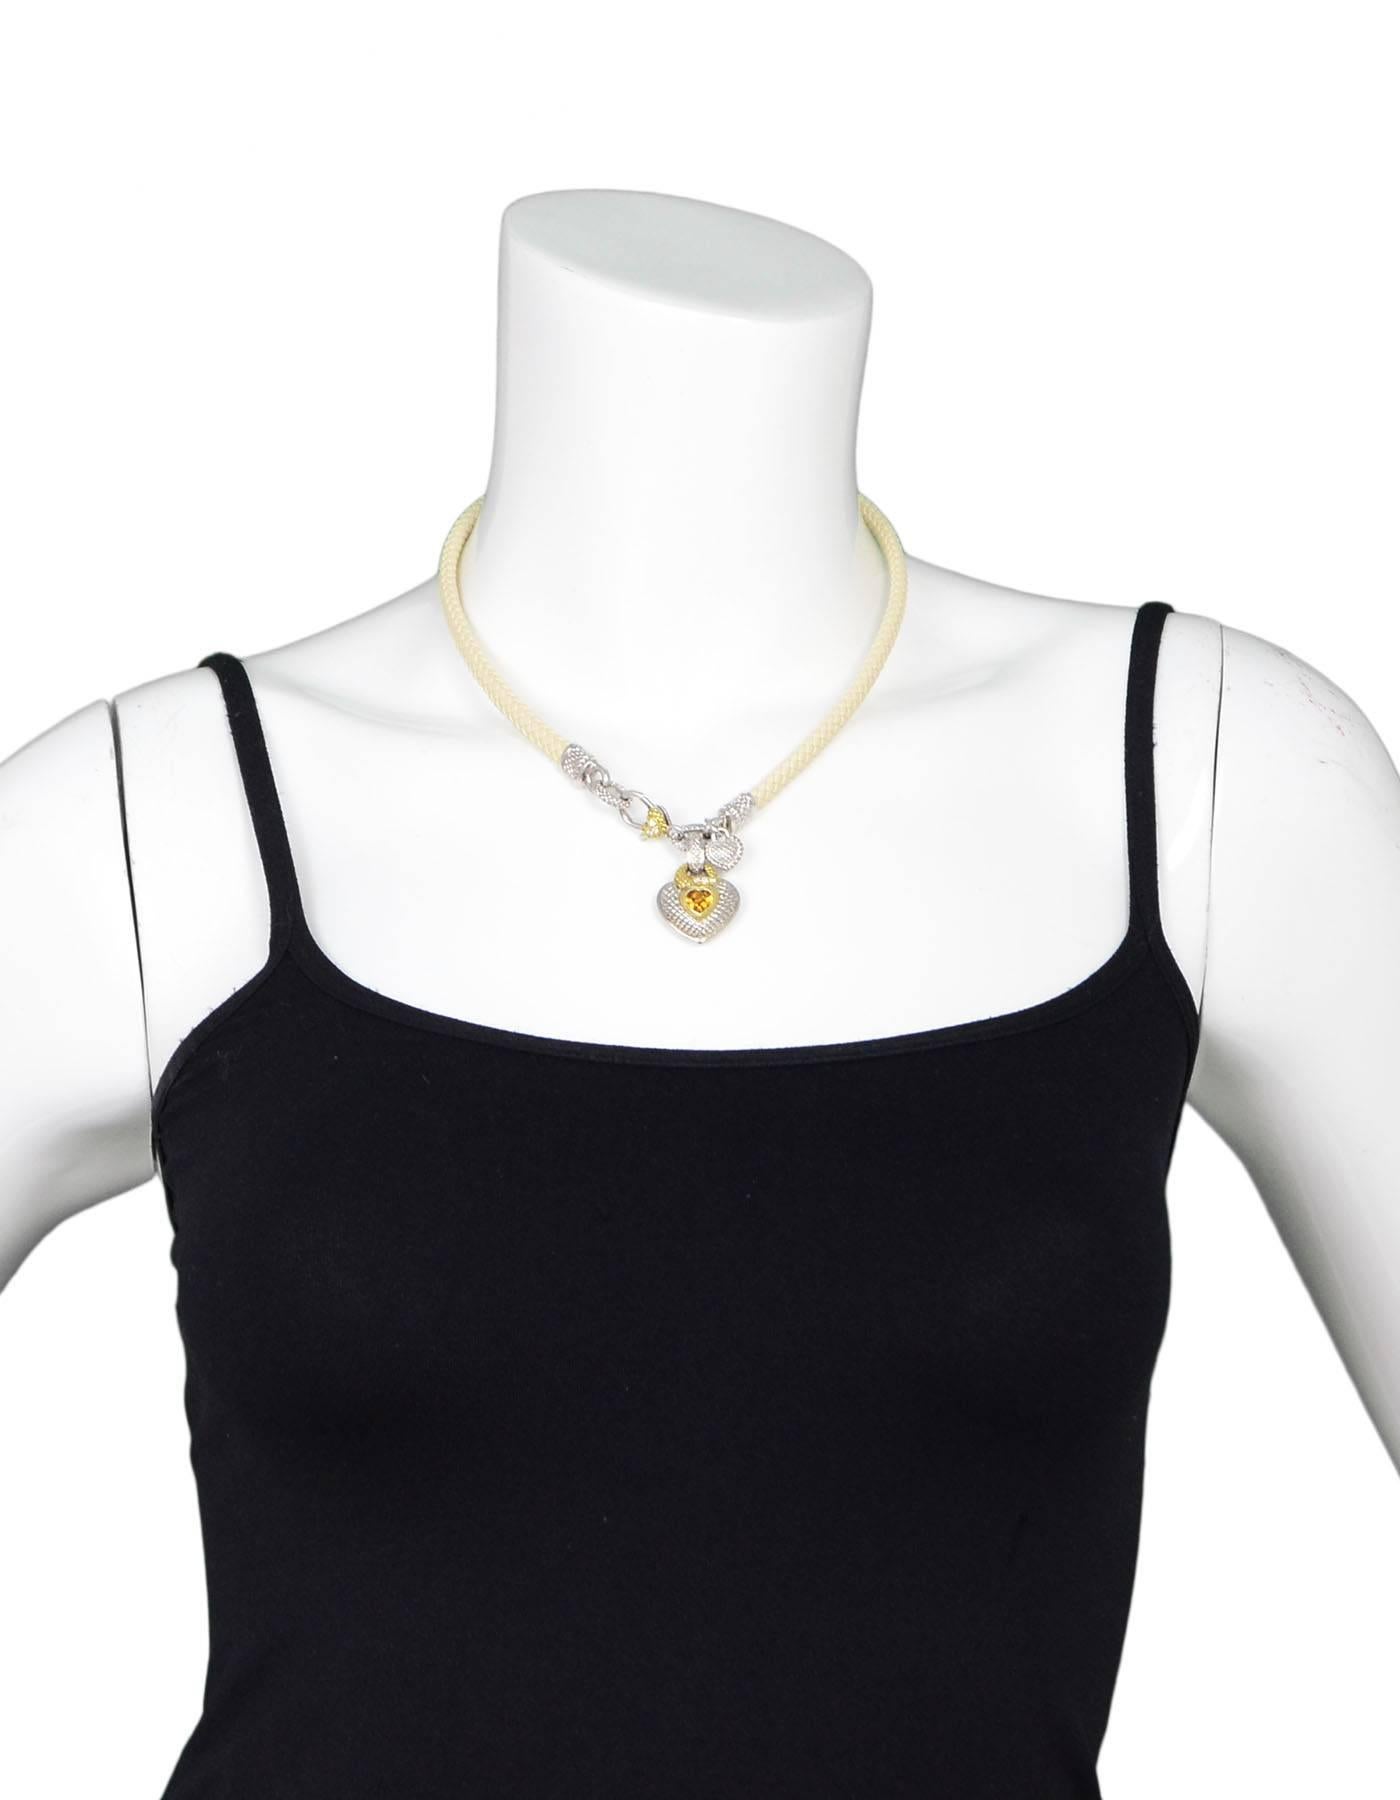 Judith Ripka Ivory Woven Leather with Sterling, Gold & Diamond Necklace

Features woven leather with sterling, yellow gold, diamond and citrine heard pendant enhancer

Color: Ivory, silver, gold, orange
Materials: 18k yellow gold, sterling silver,